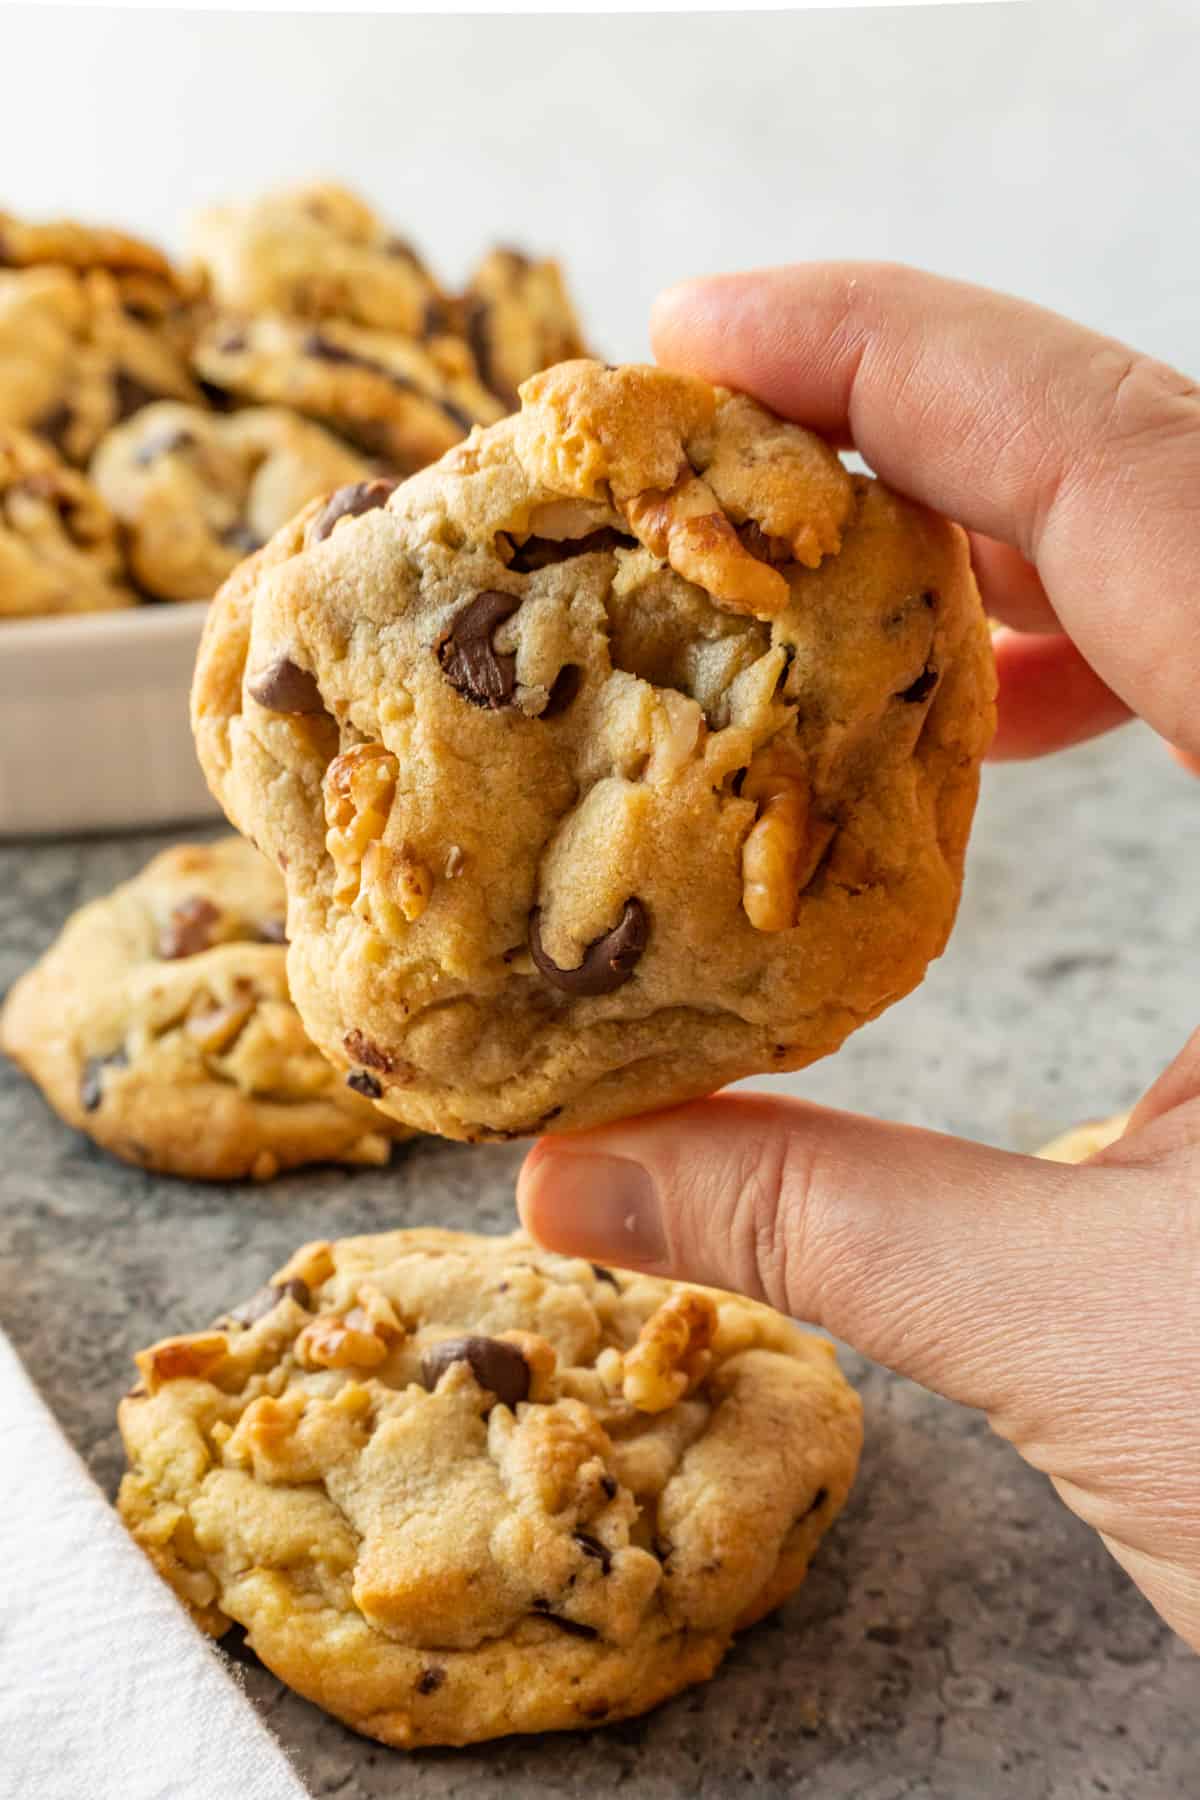 holding a walnut chocolate chip cookie